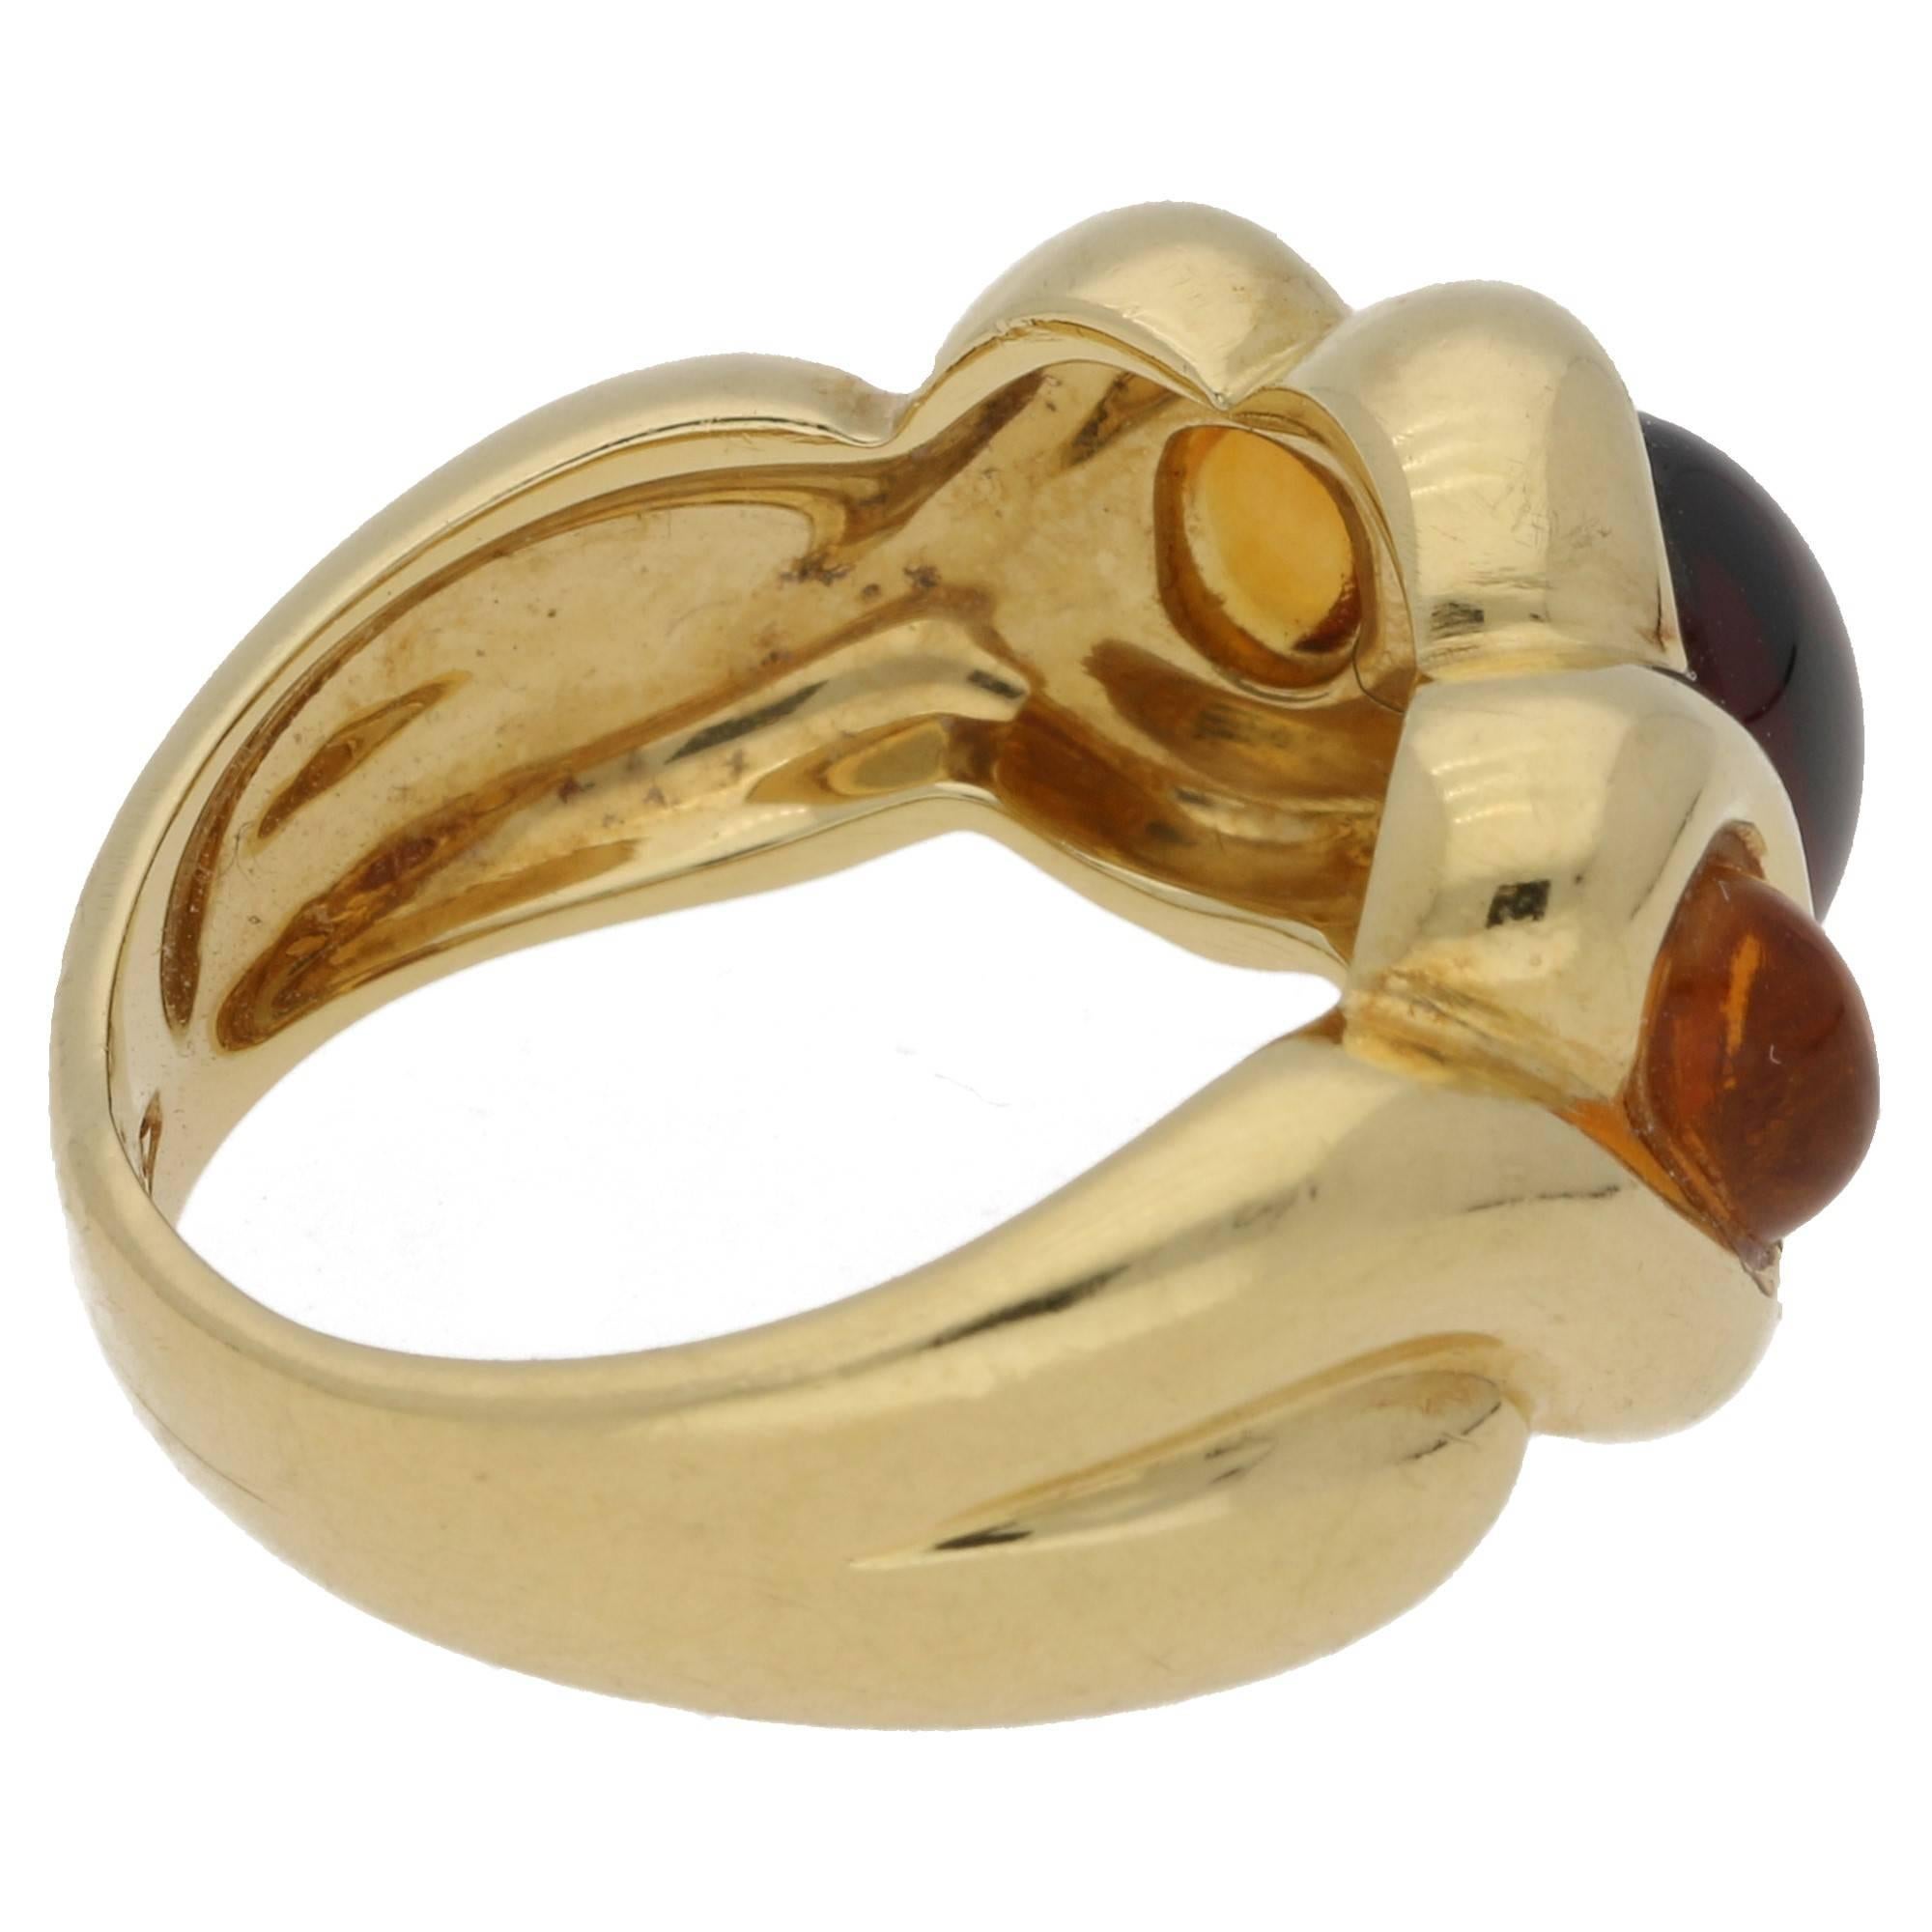 A chunky great fun ring, in hallmarked 750 (18 karat) gold. Set with two citrine cabochon cut stones, flanking a central garnet. Ring size is presently a UK N, but this can be sized upon request.